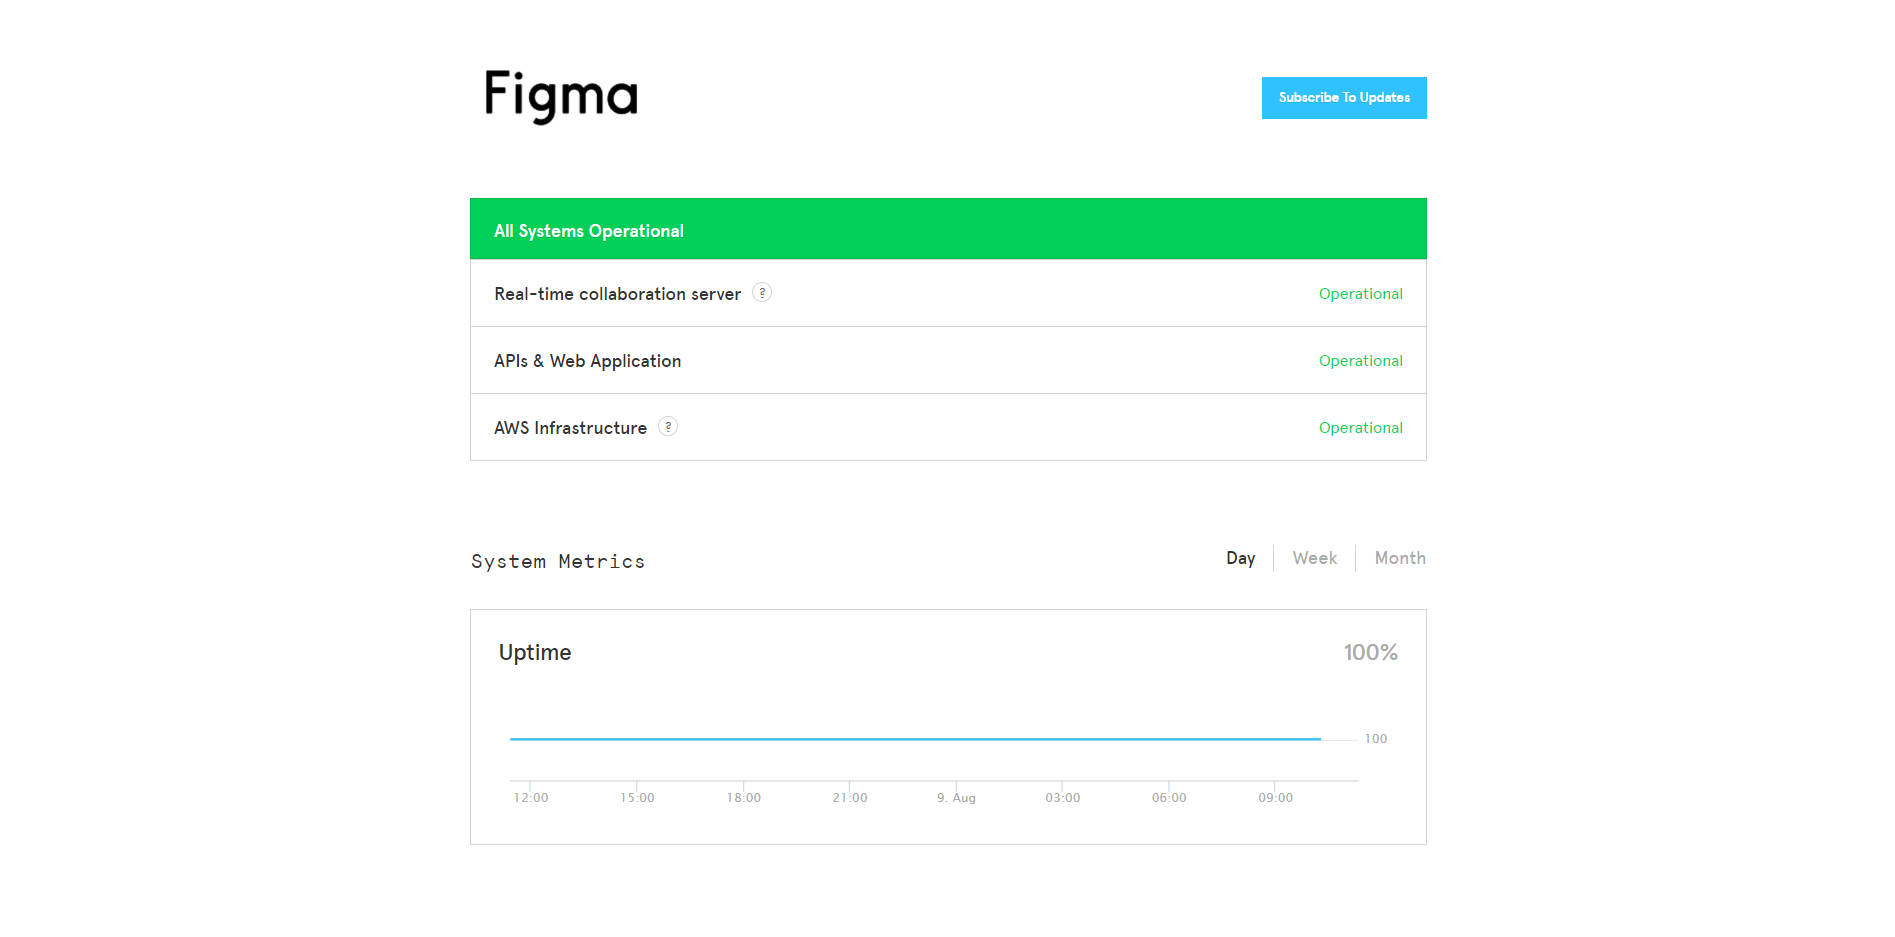 Figma comments are not posting